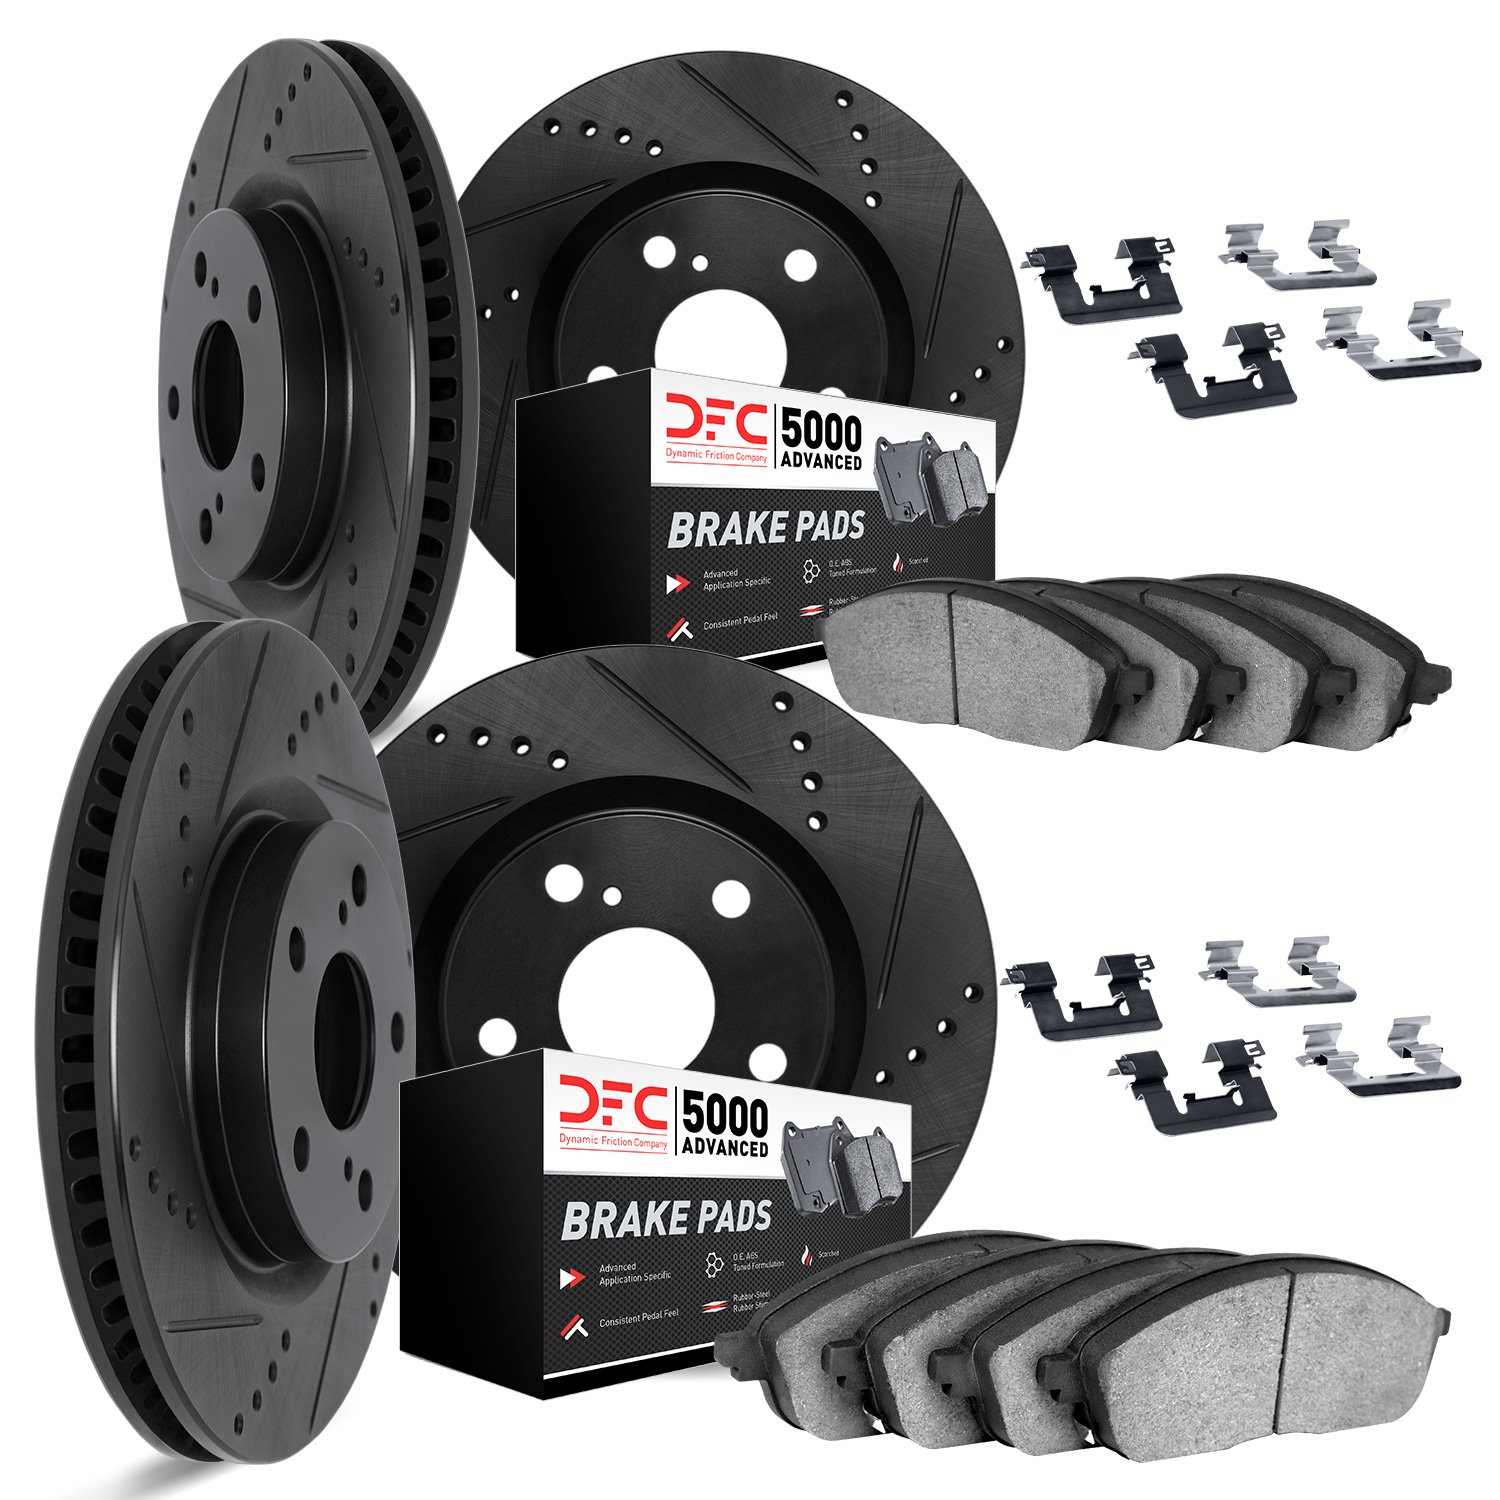 8514-27075 Drilled/Slotted Brake Rotors w/5000 Advanced Brake Pads Kit & Hardware [Black], 2010-2016 Volvo, Position: Front and